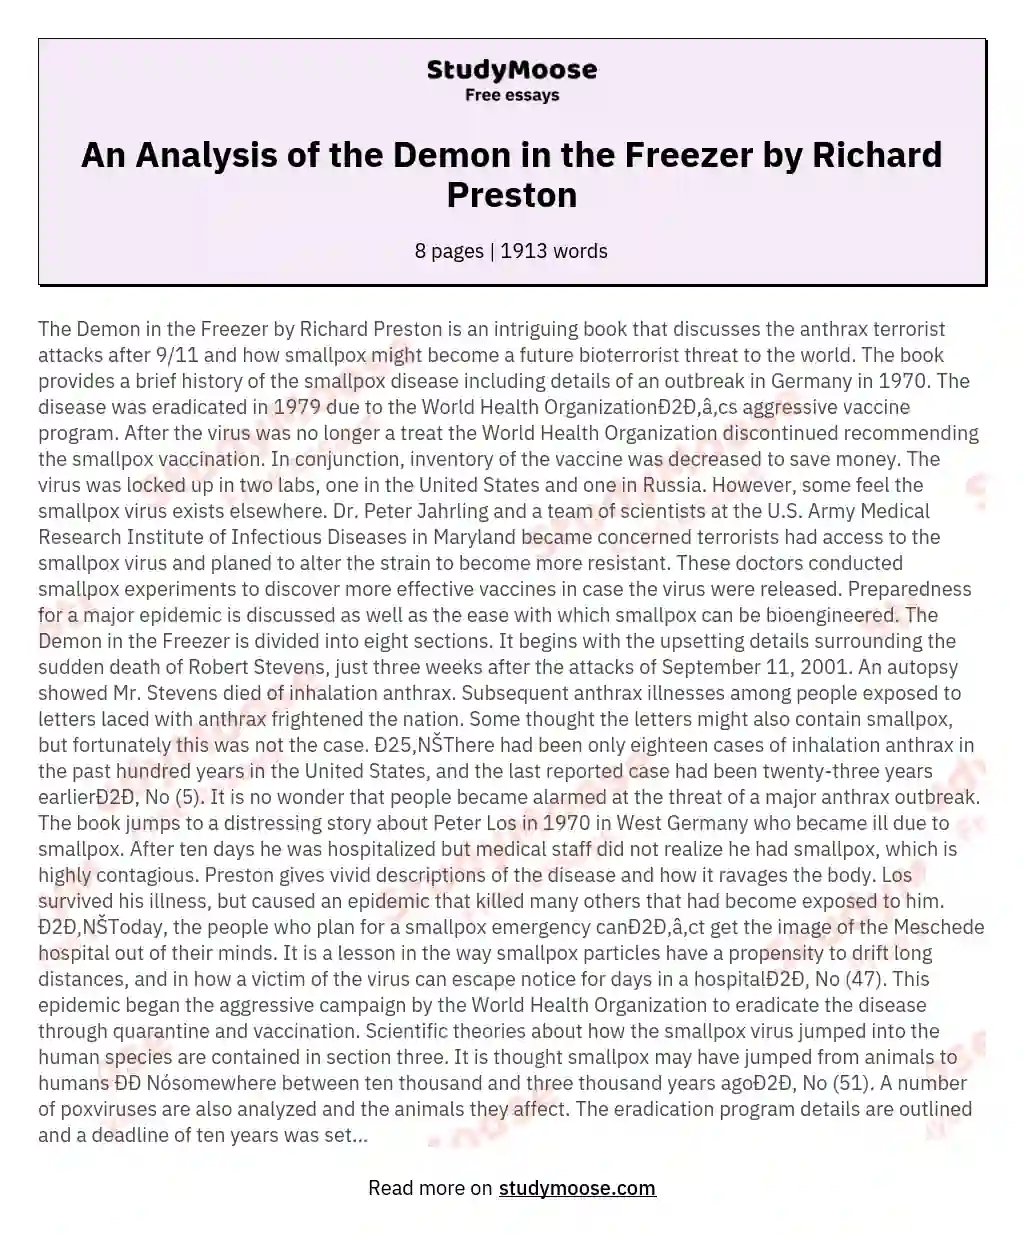 An Analysis of the Demon in the Freezer by Richard Preston essay